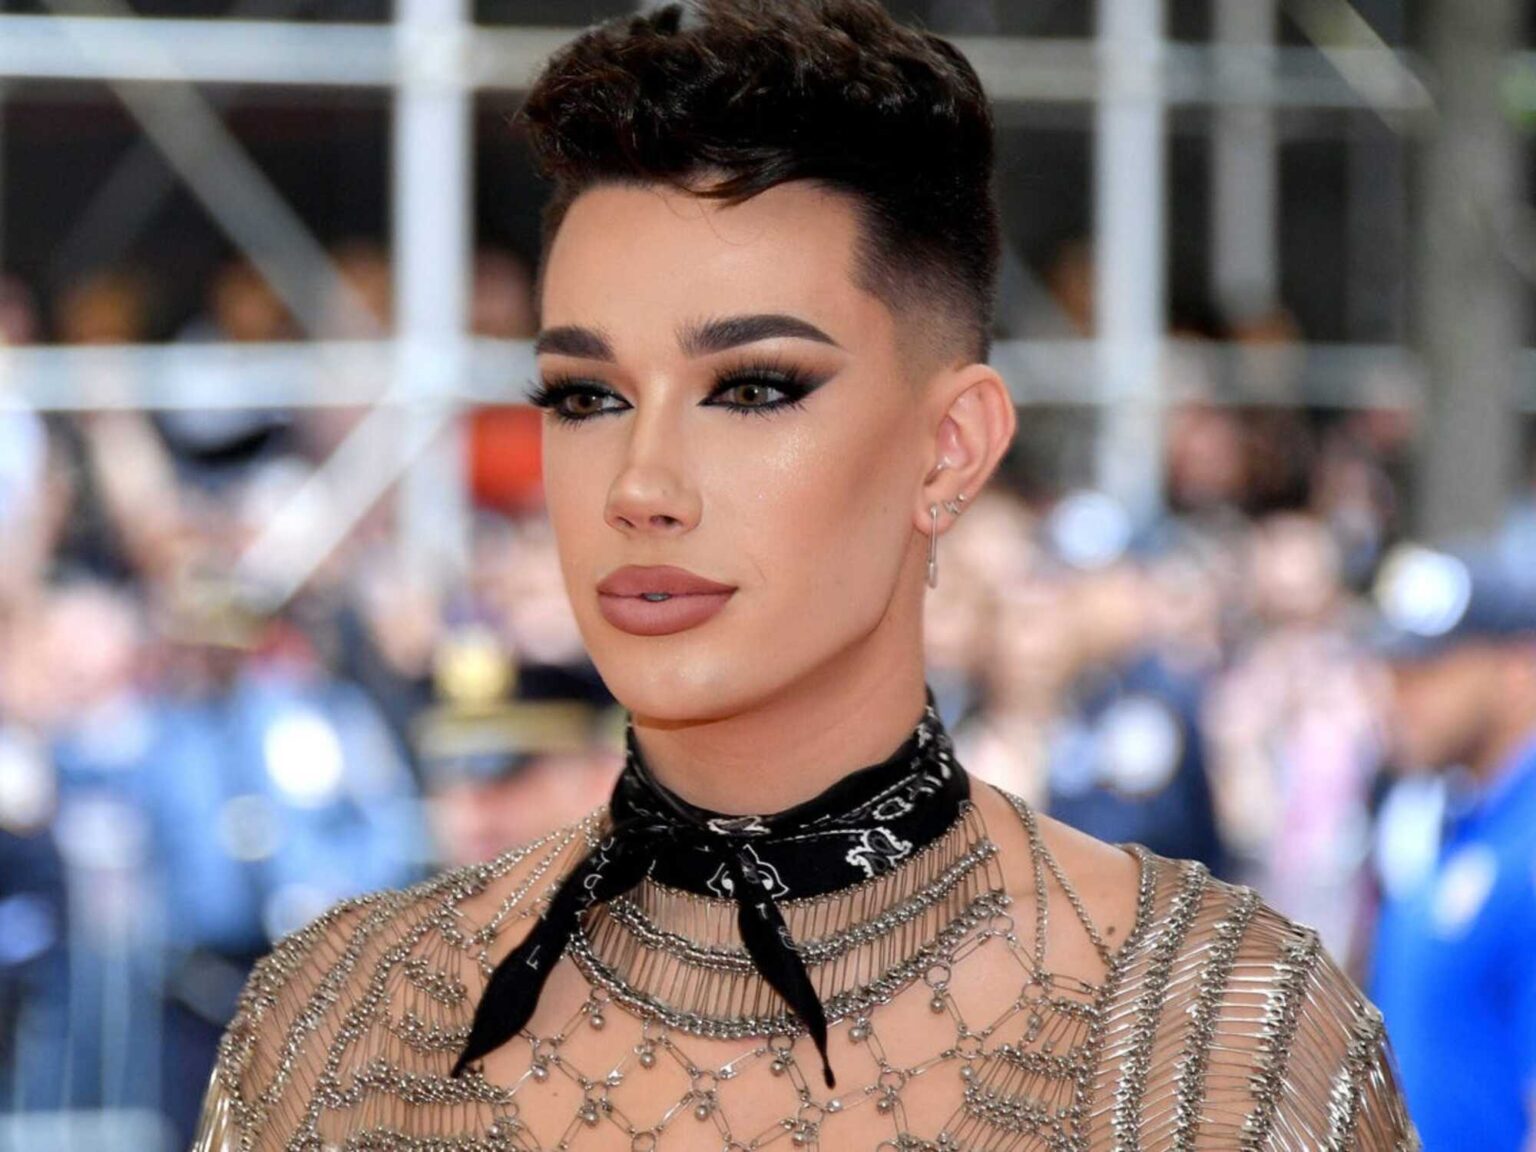 James Charles is not out of the woods just yet. But will his net worth save him from those harassment allegations? Here's how wealthy the YouTuber is.